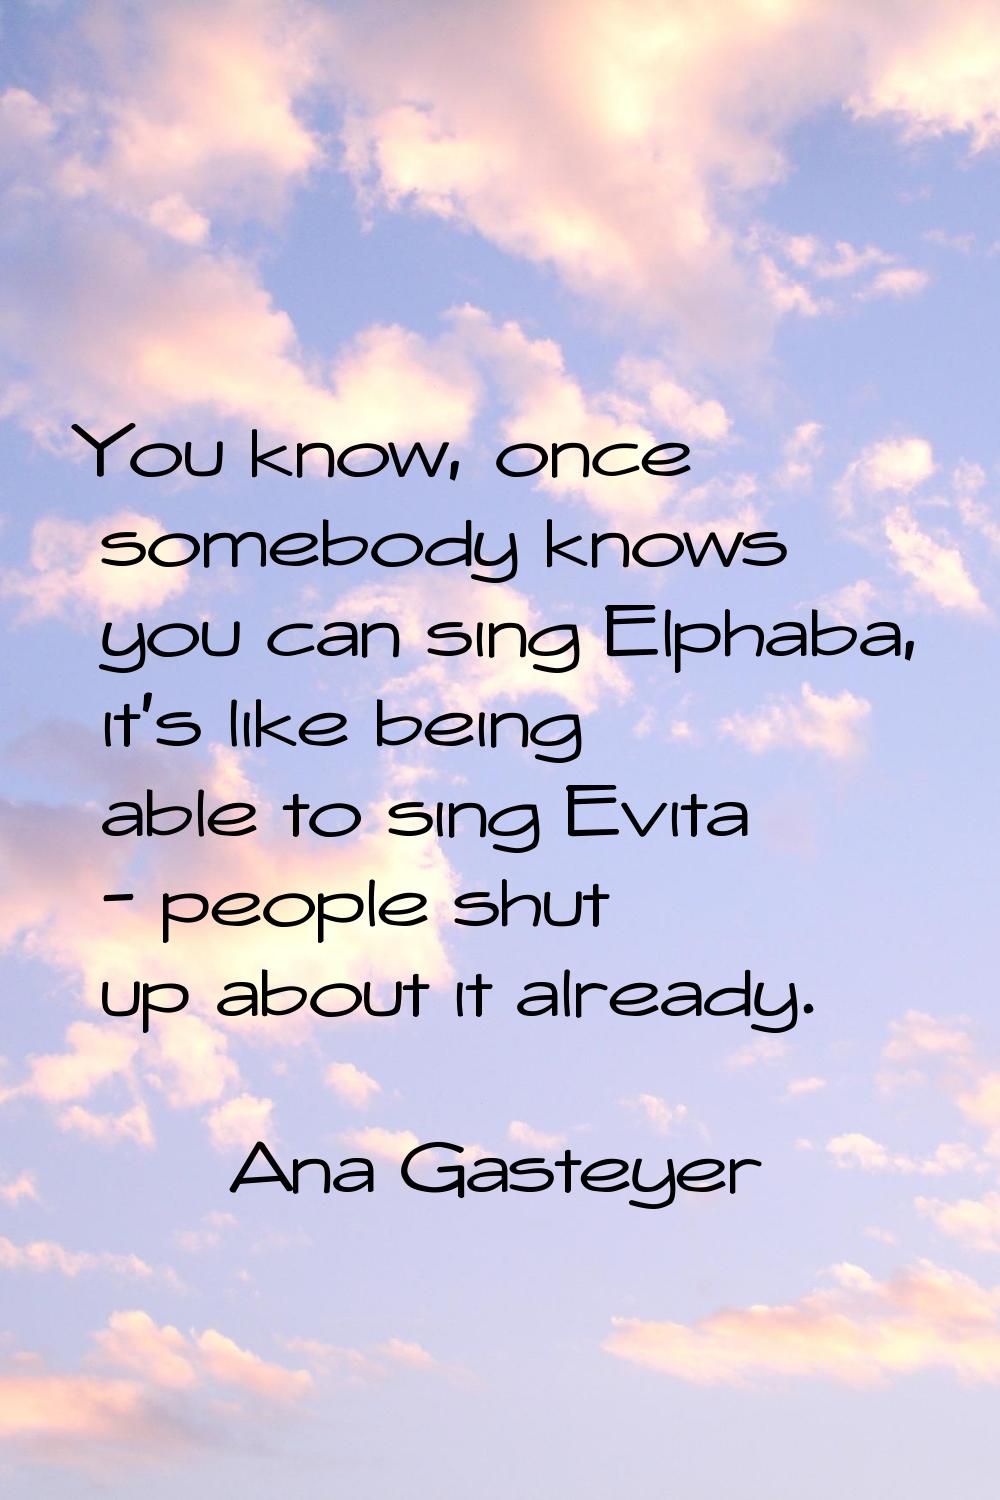 You know, once somebody knows you can sing Elphaba, it's like being able to sing Evita - people shu